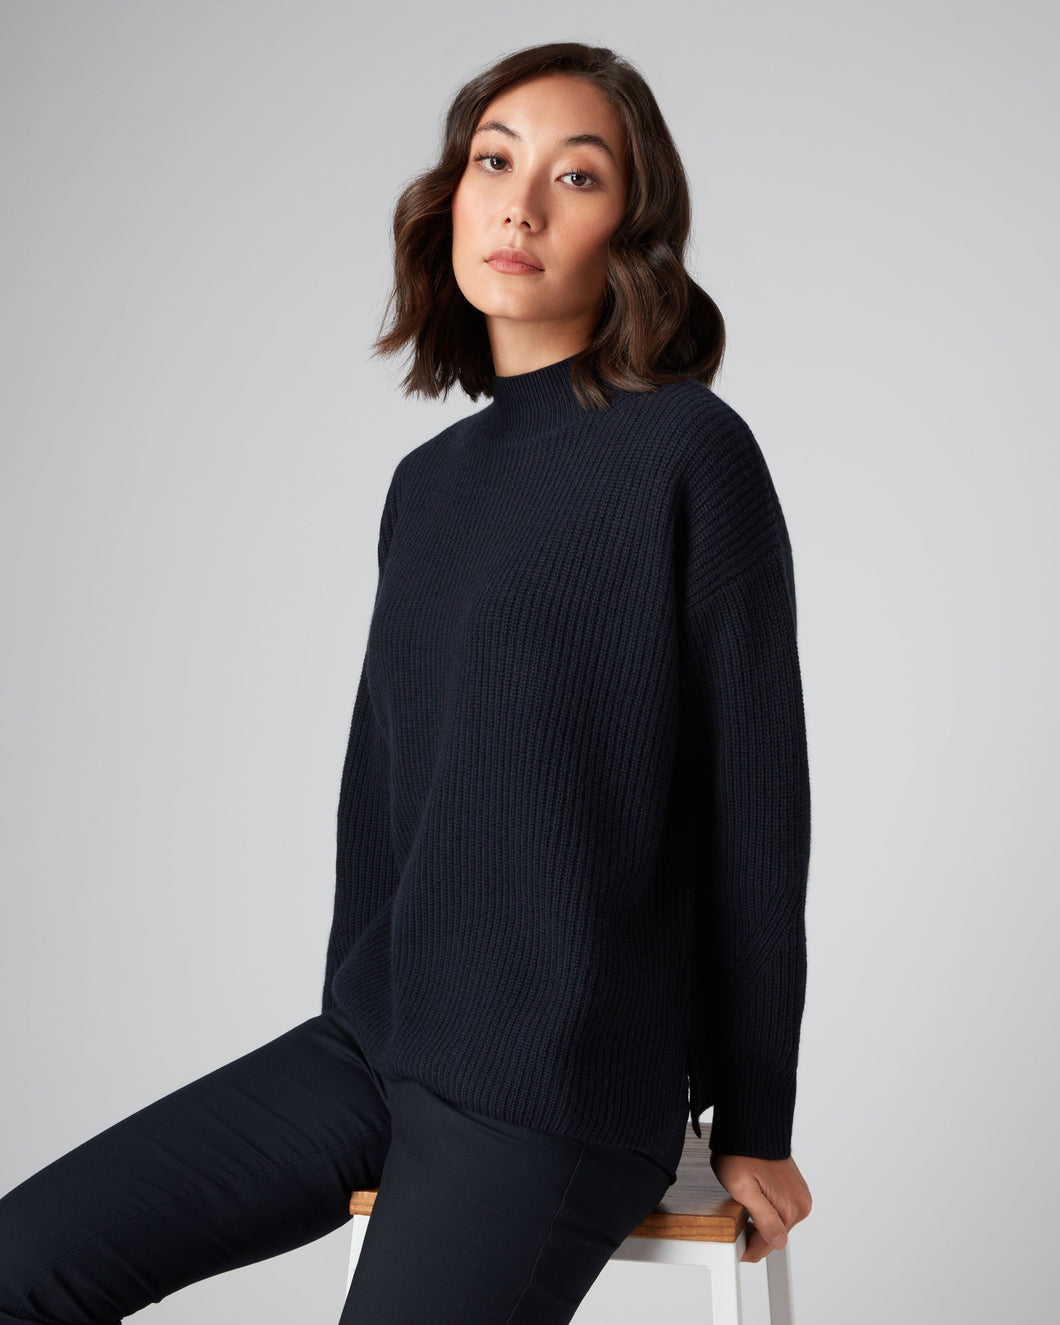 N.Peal Women's Relaxed Rib Cashmere Jumper Navy Blue